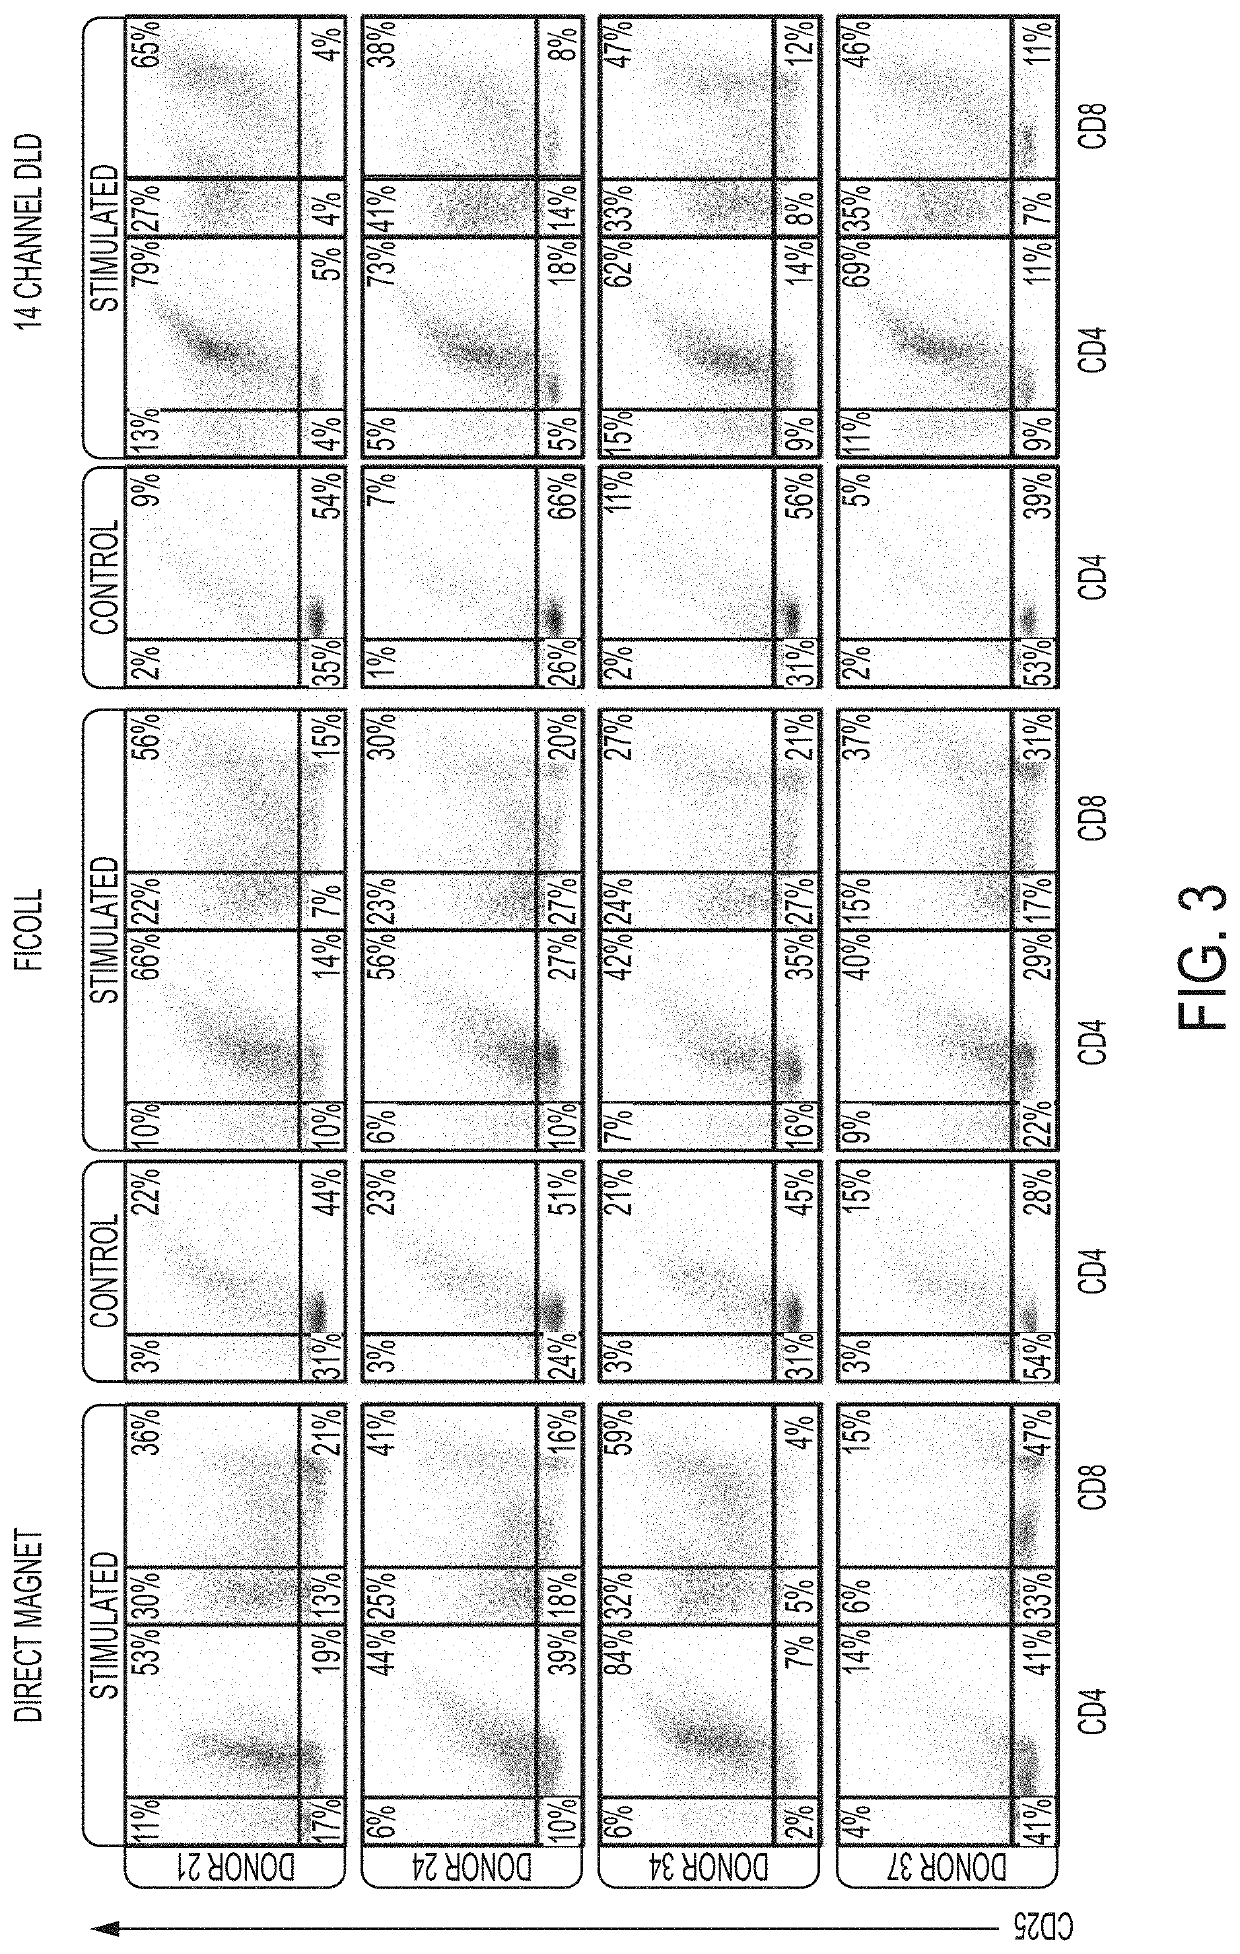 Deterministic lateral displacement in the preparation of cells and compositions for therapeutic uses